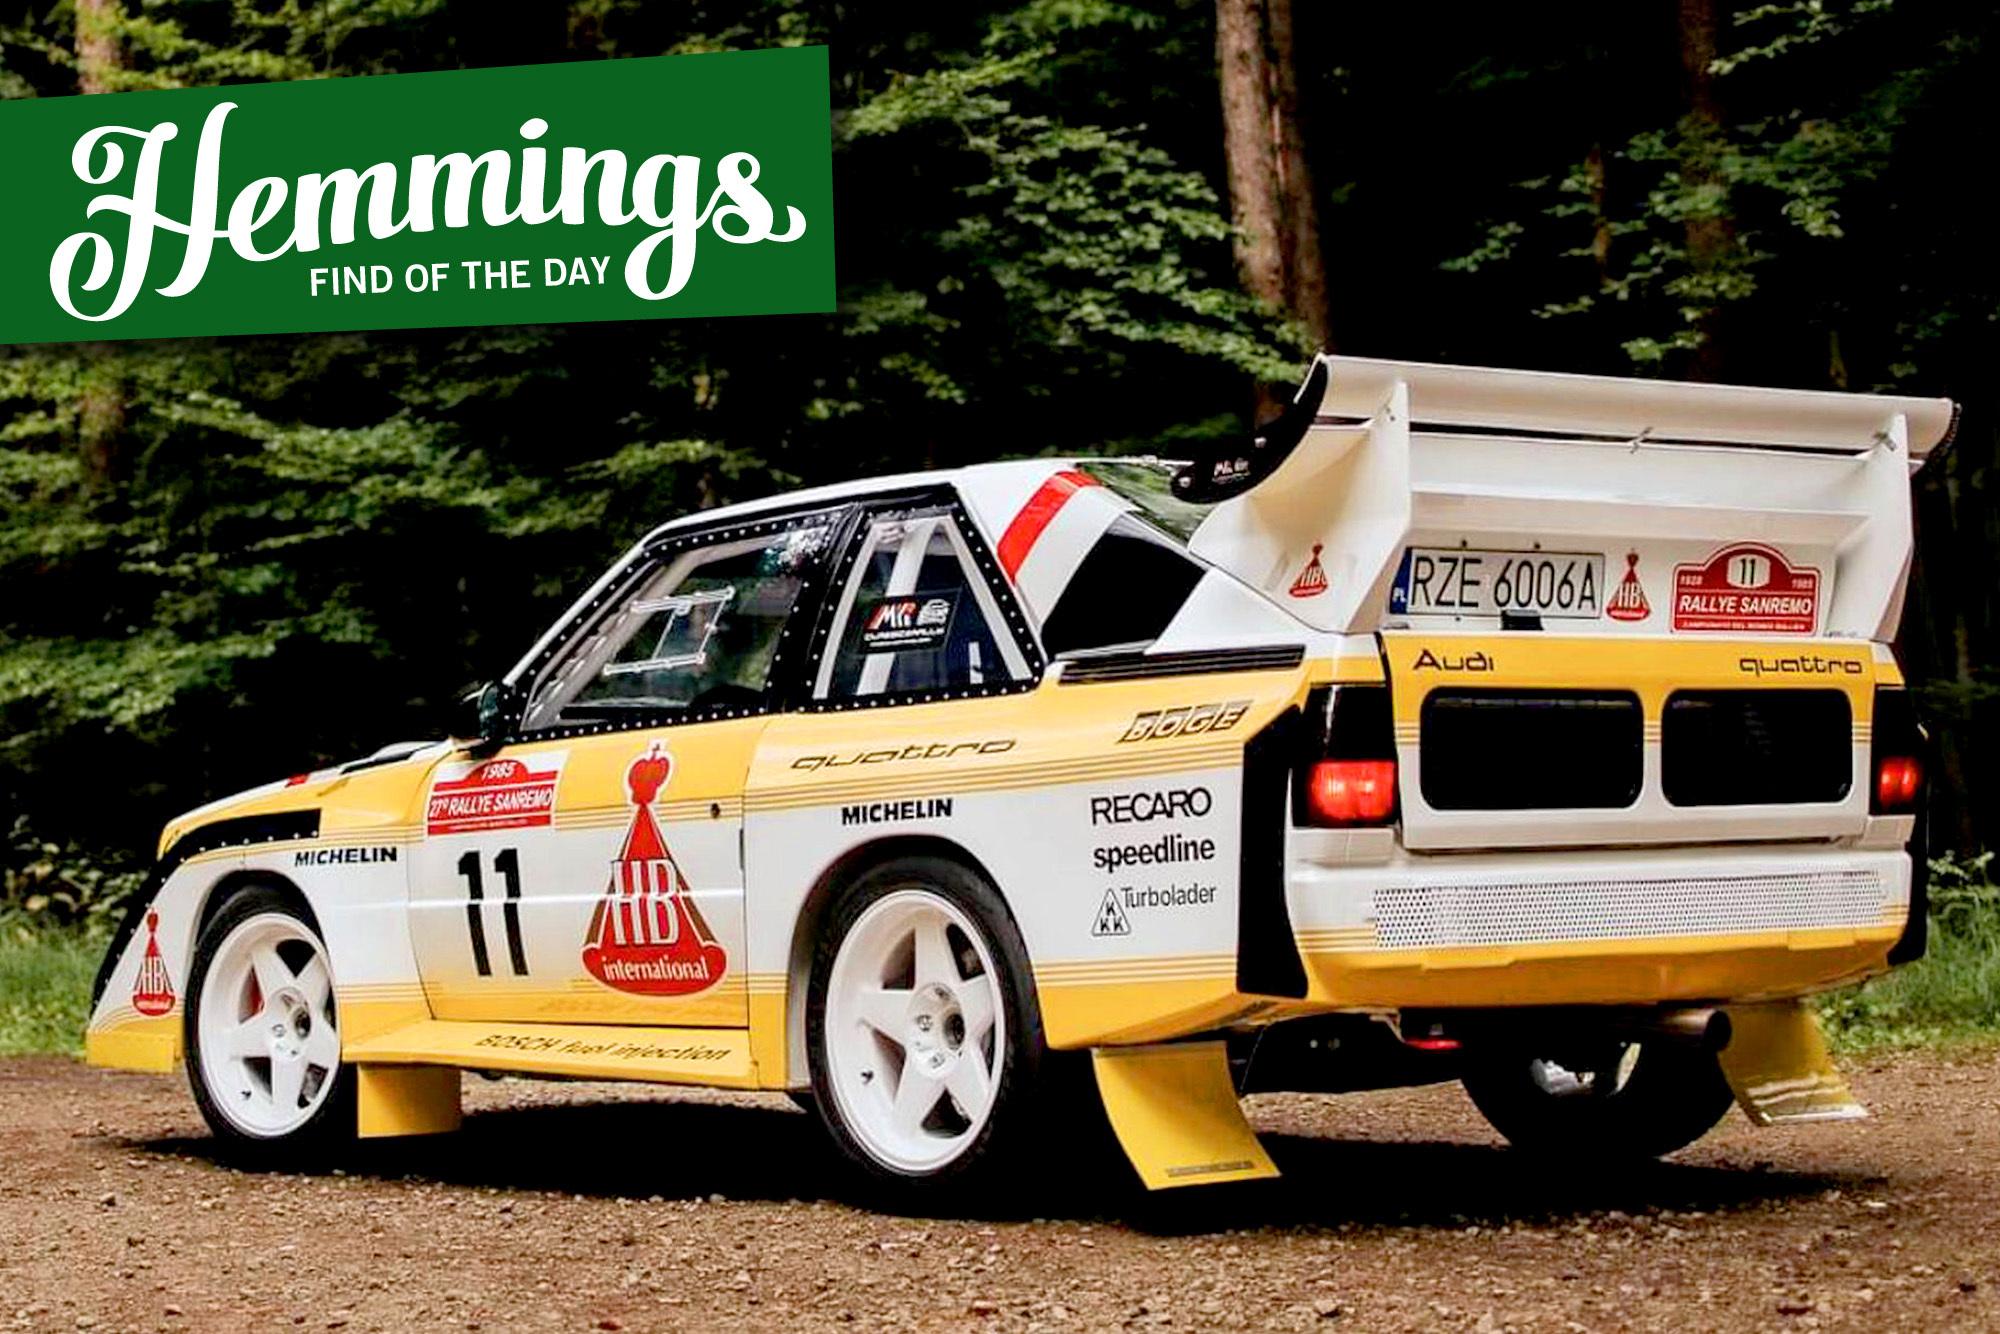 Replica 1985 Audi Quattro S1 E2 nails the details, is ready for action